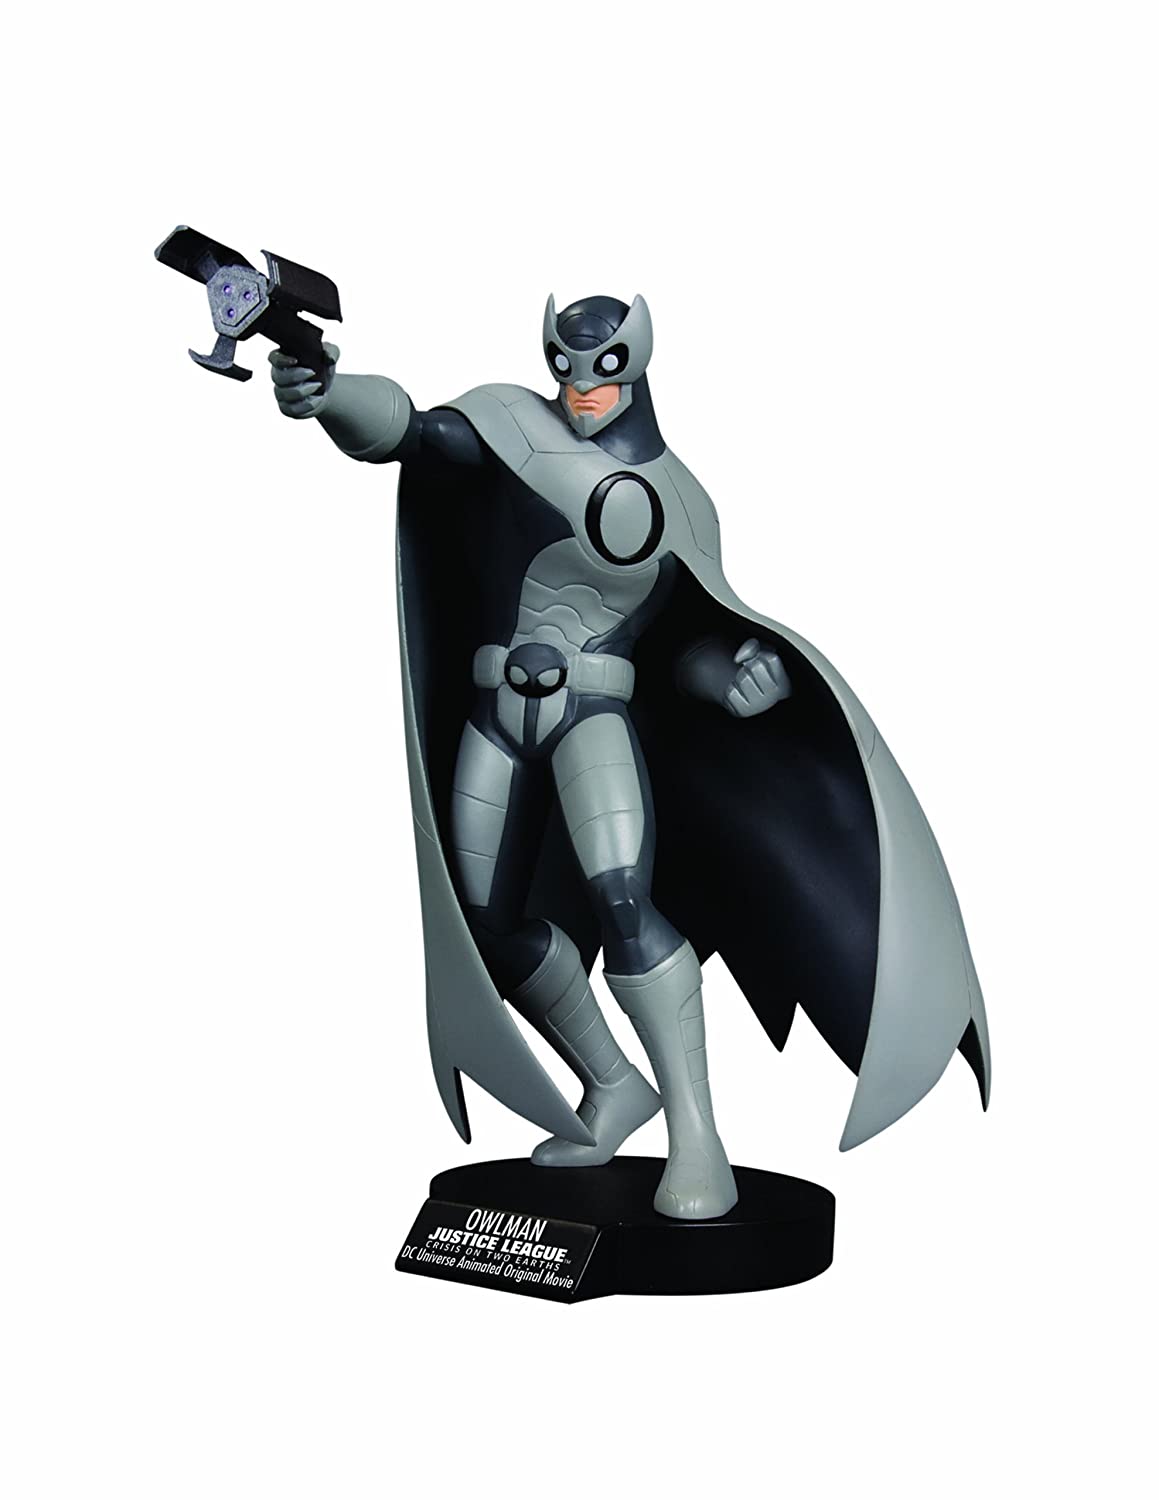 Buy Justice League: Crisis on Two Earths: Owlman DVD Maquette Online at Low Prices in India